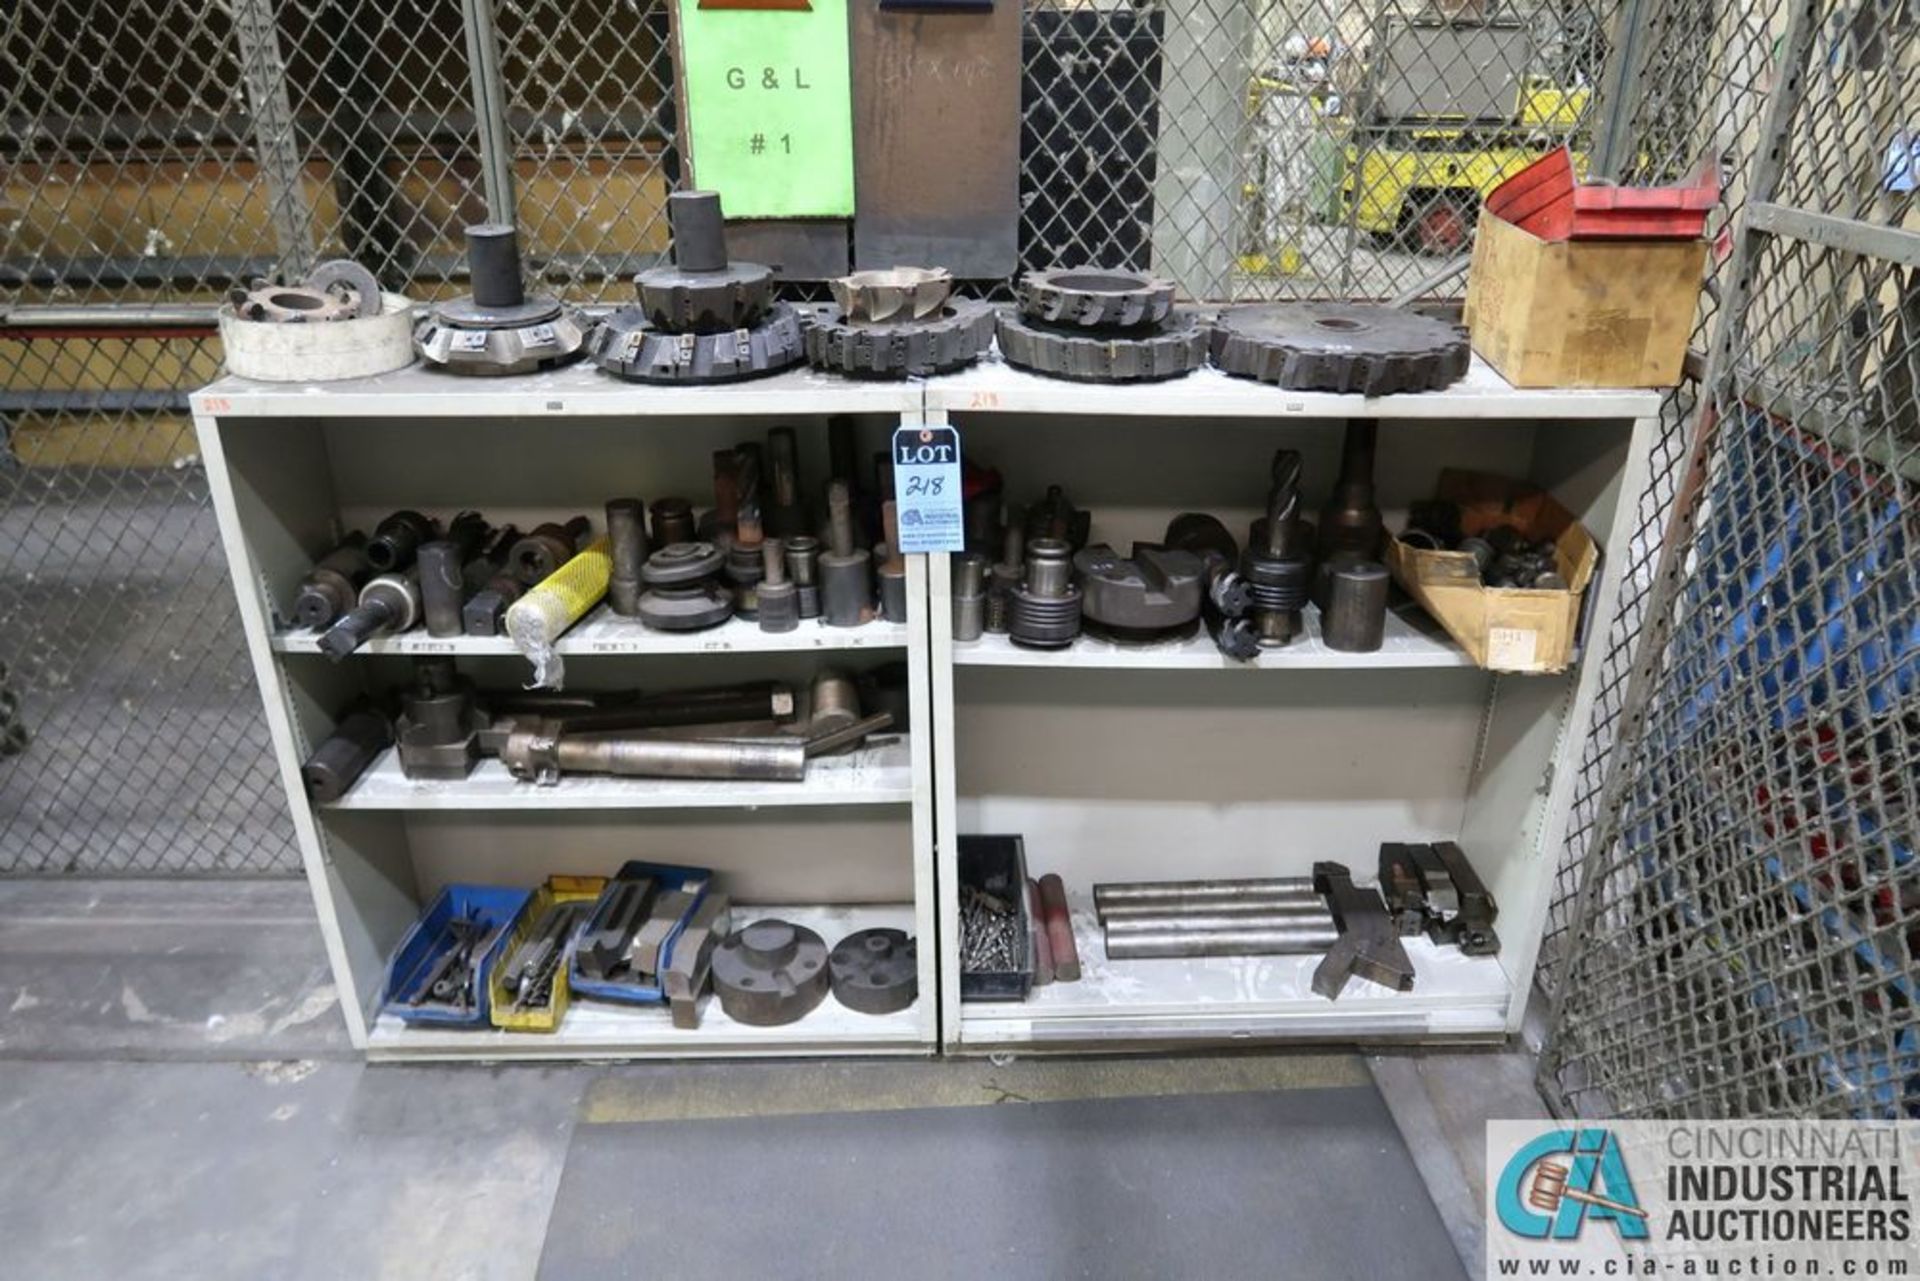 (LOT) SHELVING WITH ASSORTED TOOLING, TAPS, FLY CUTTER, TOOL HOLDERS AND OTHER